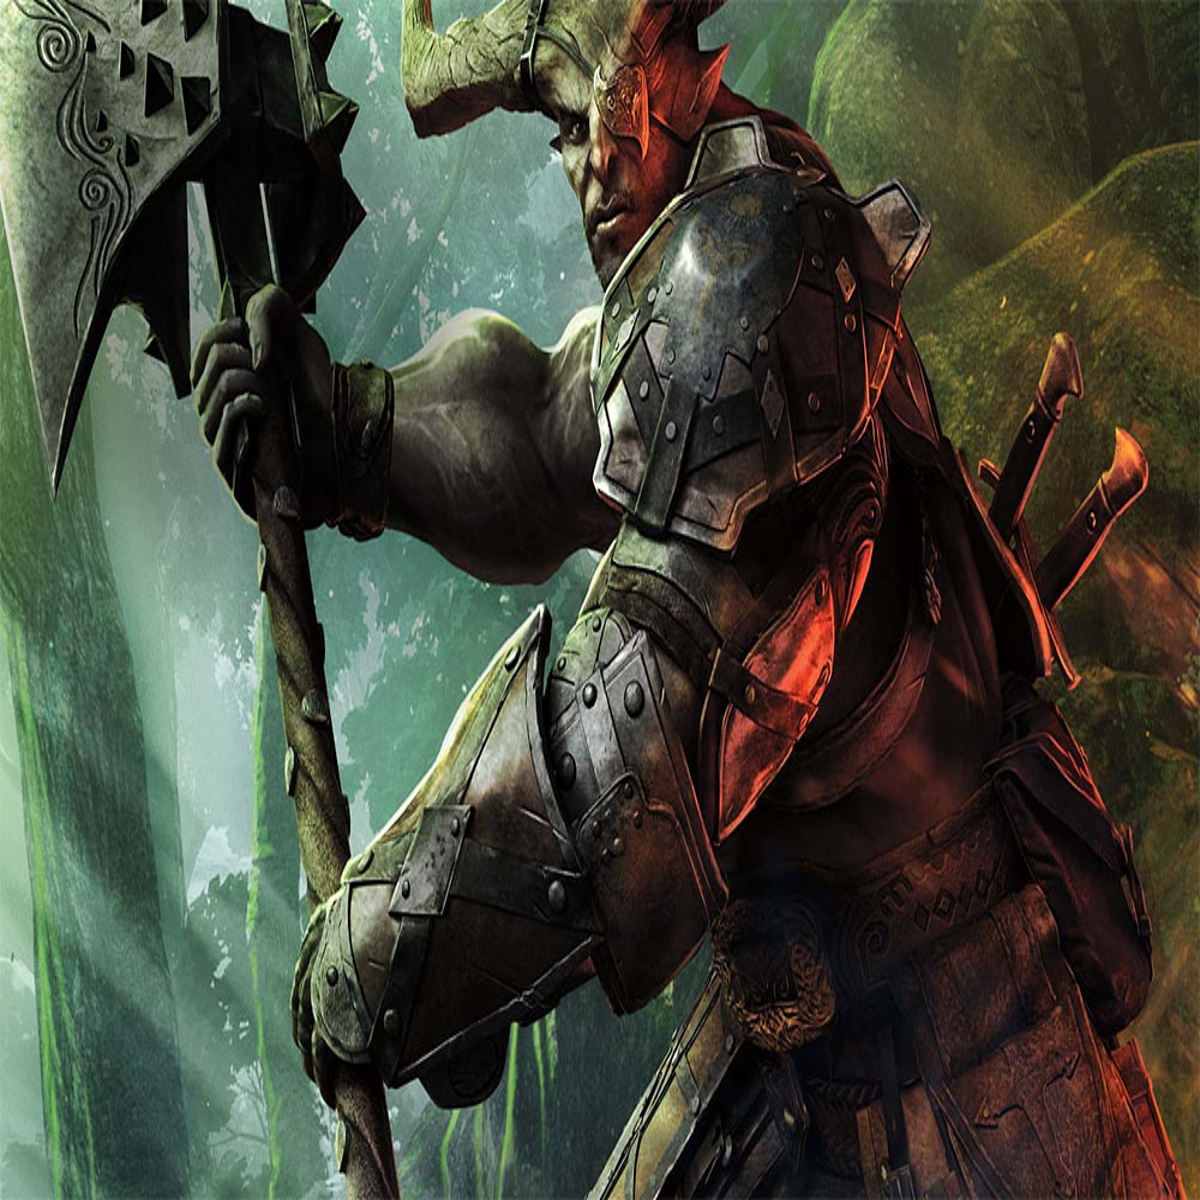 Every Main Quest in Dragon Age: Inquisition, Ranked By Diffculty